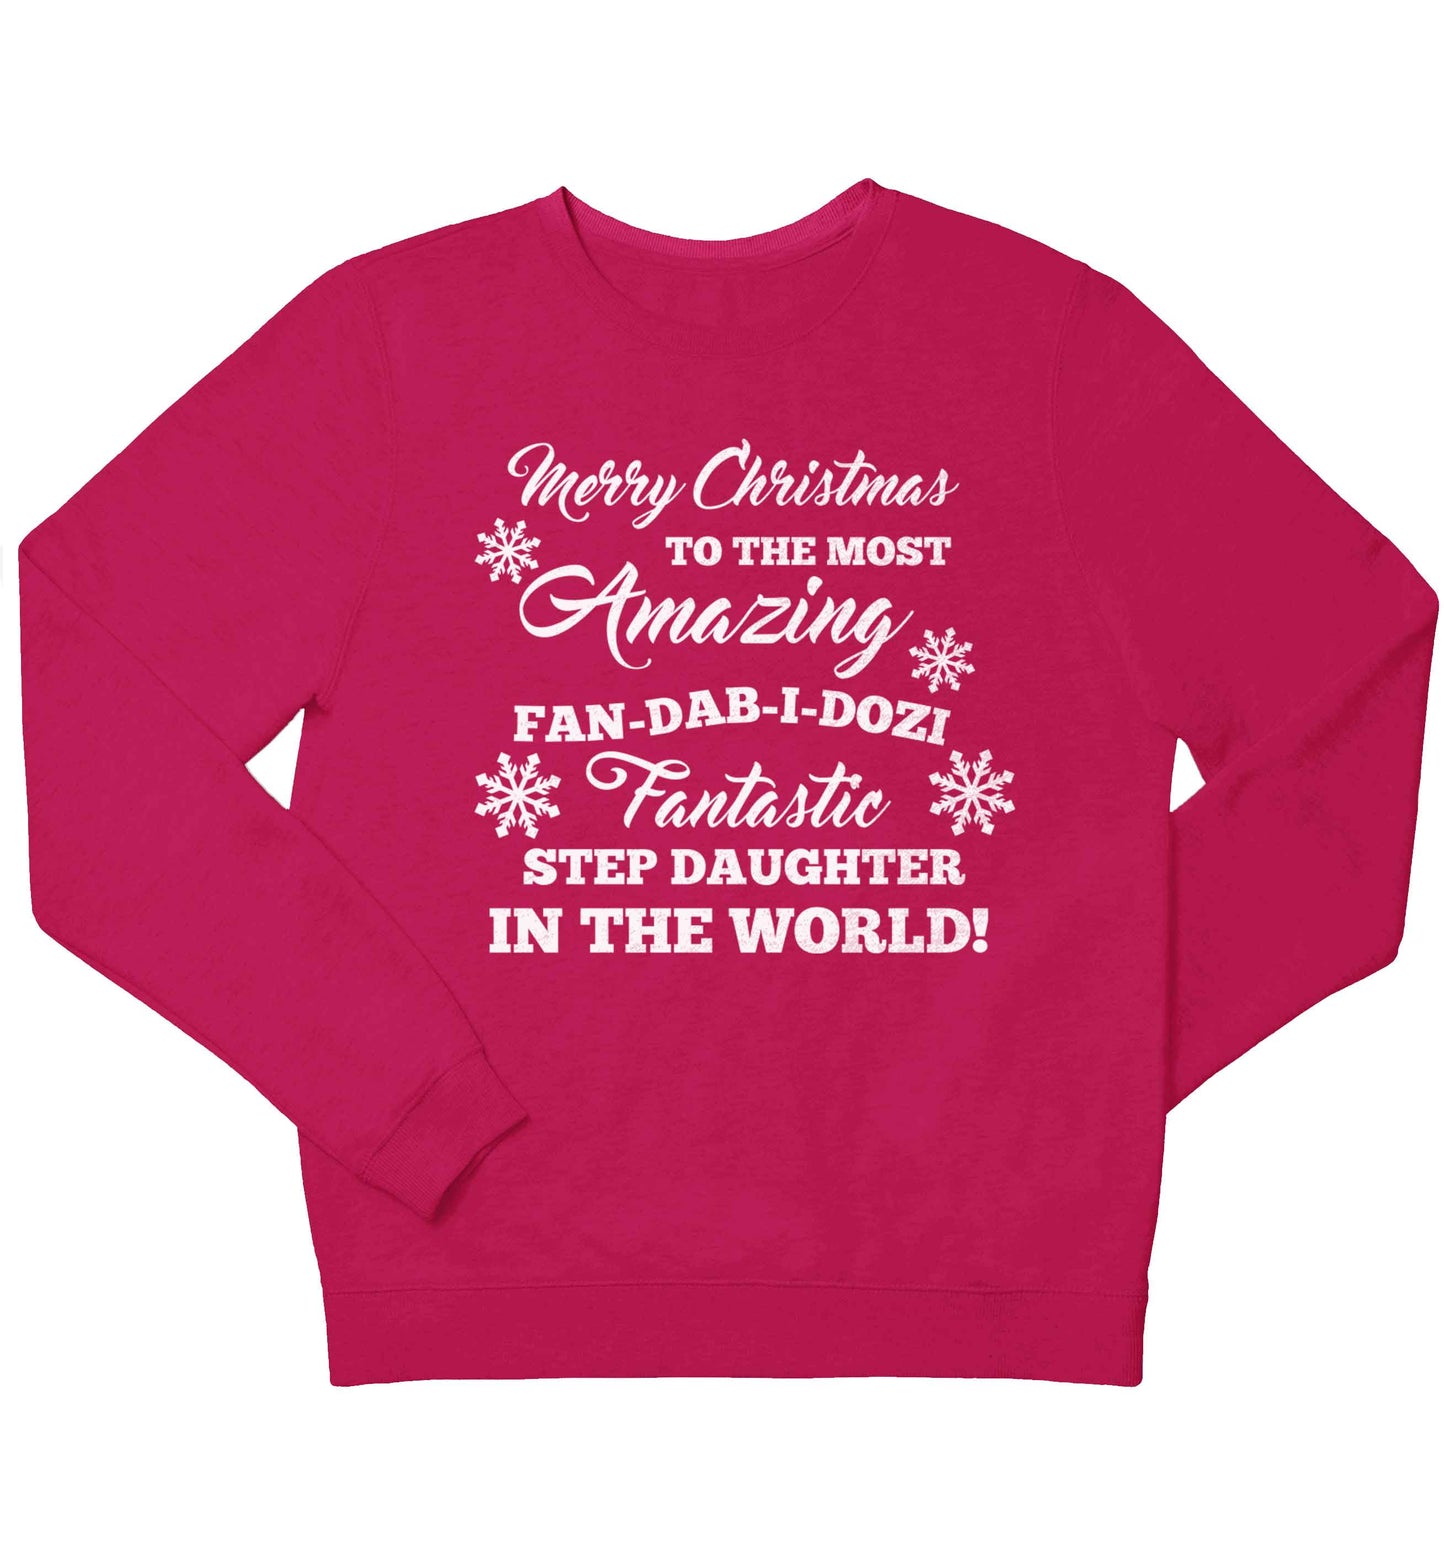 Merry Christmas to the most amazing fan-dab-i-dozi fantasic Step Daughter in the world children's pink sweater 12-13 Years